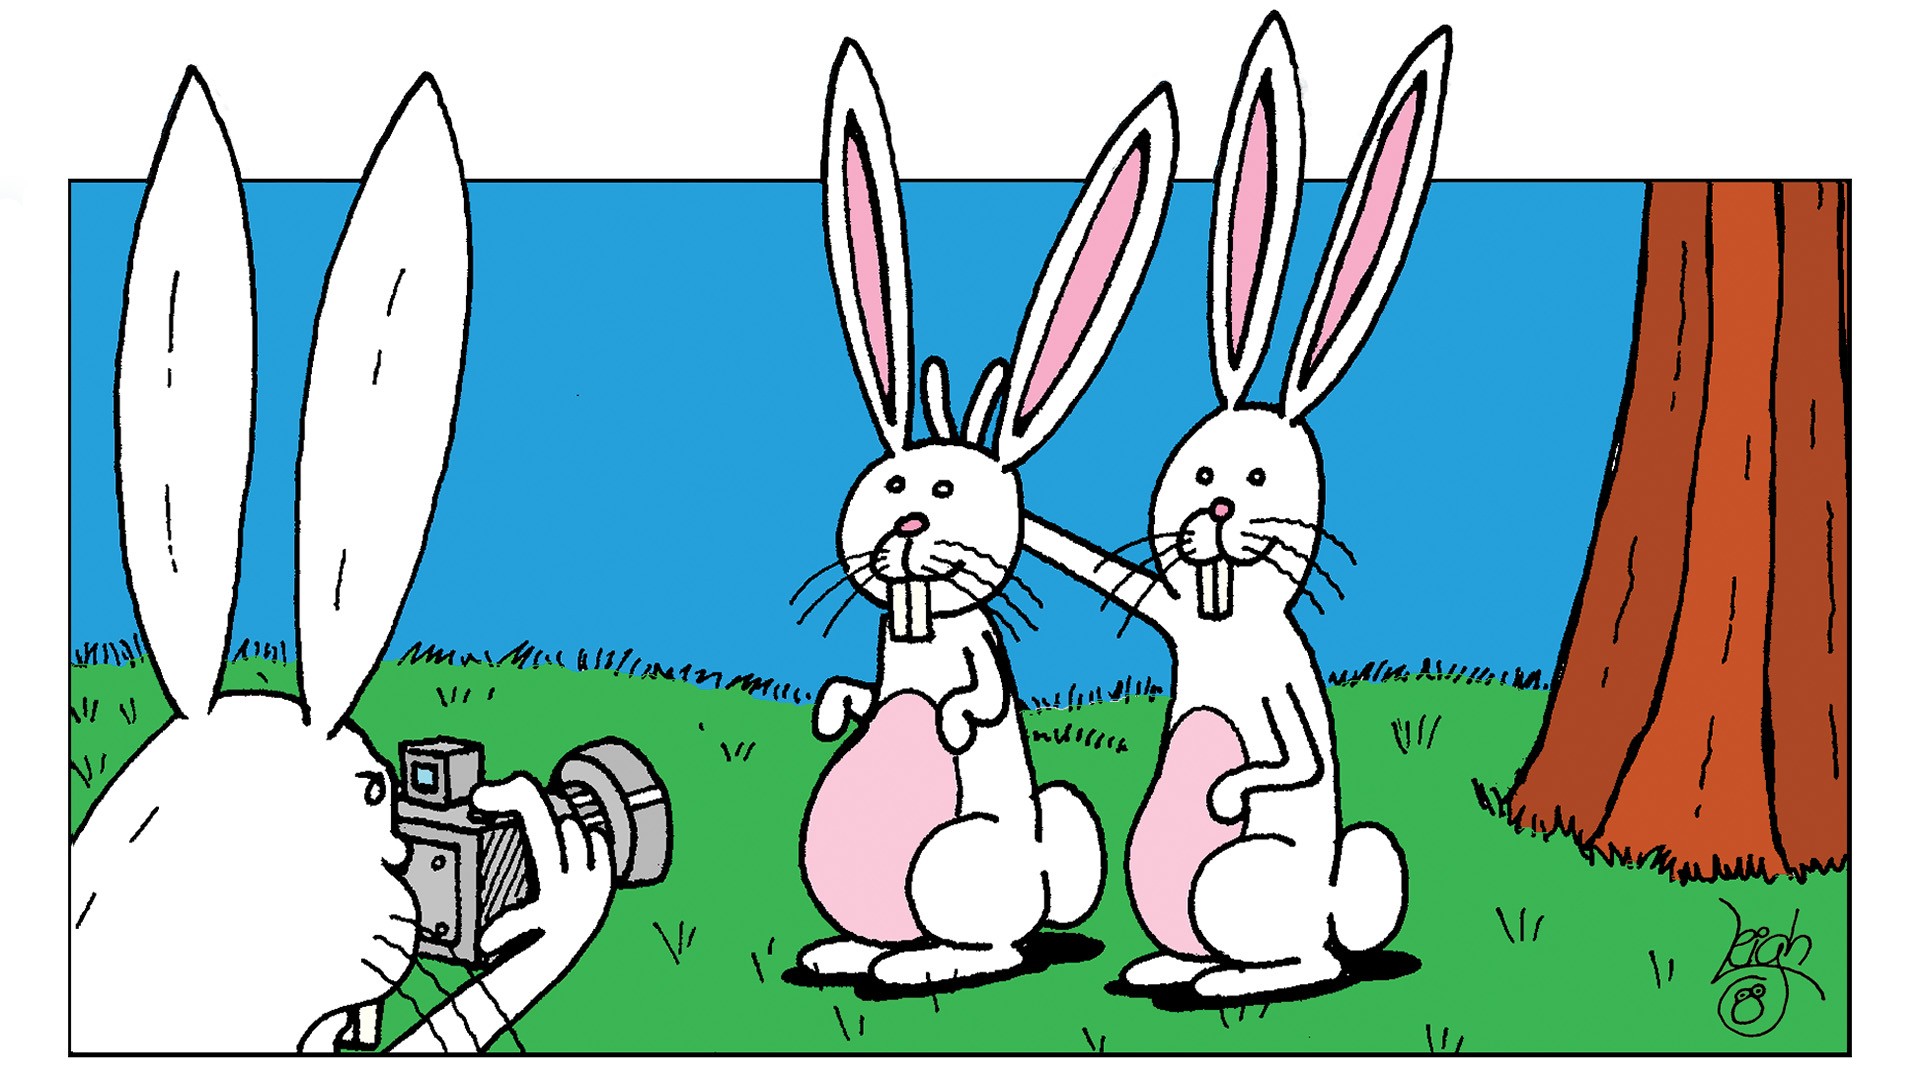 Two cartoon bunnies, being photographed by a third bunny. One of the bunnies is giving the other "bunny ears" with two fingers.